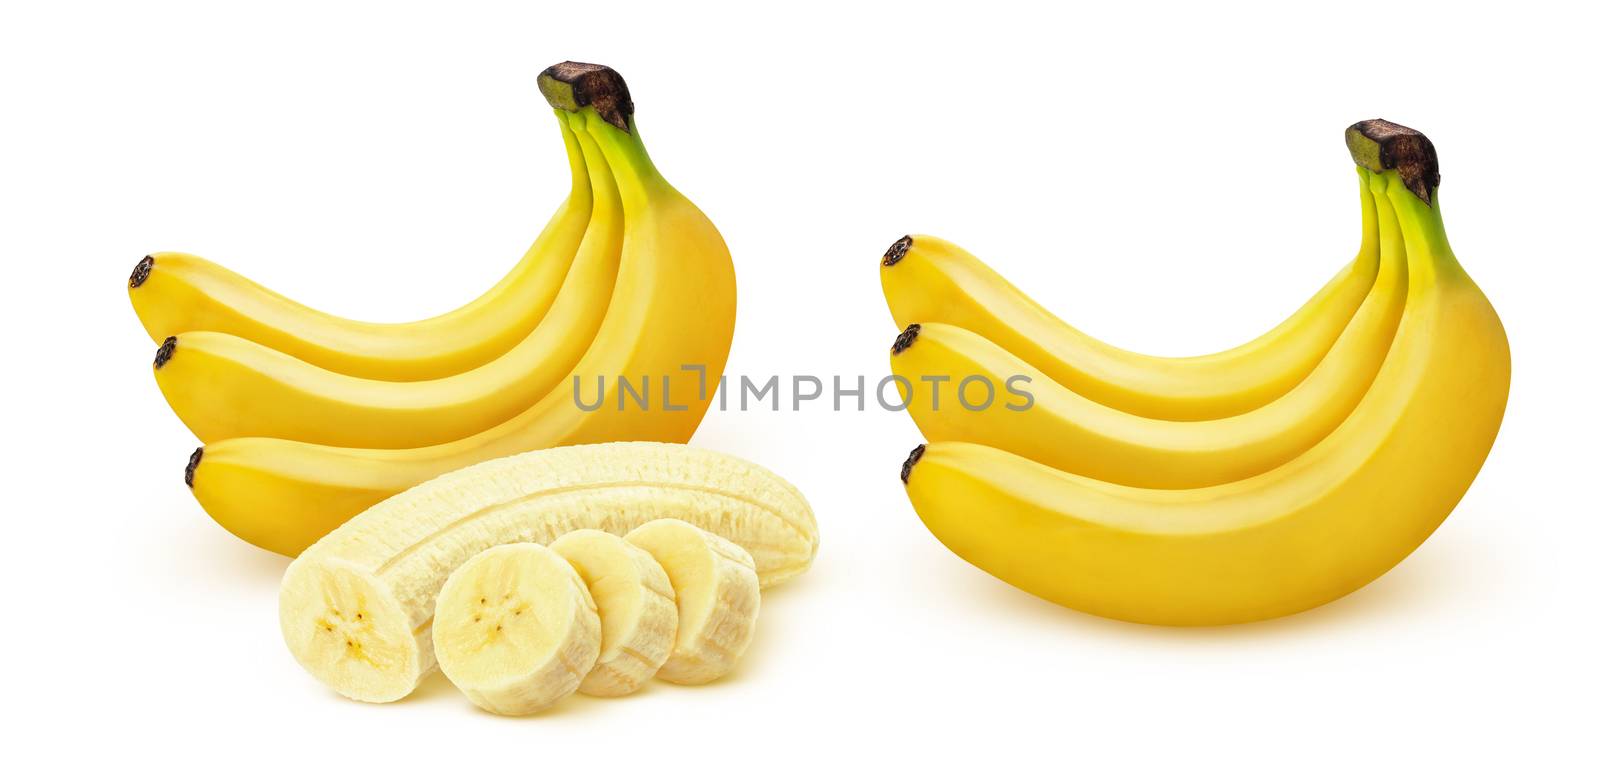 Banana. Bunch of bananas isolated on white background with clipping path